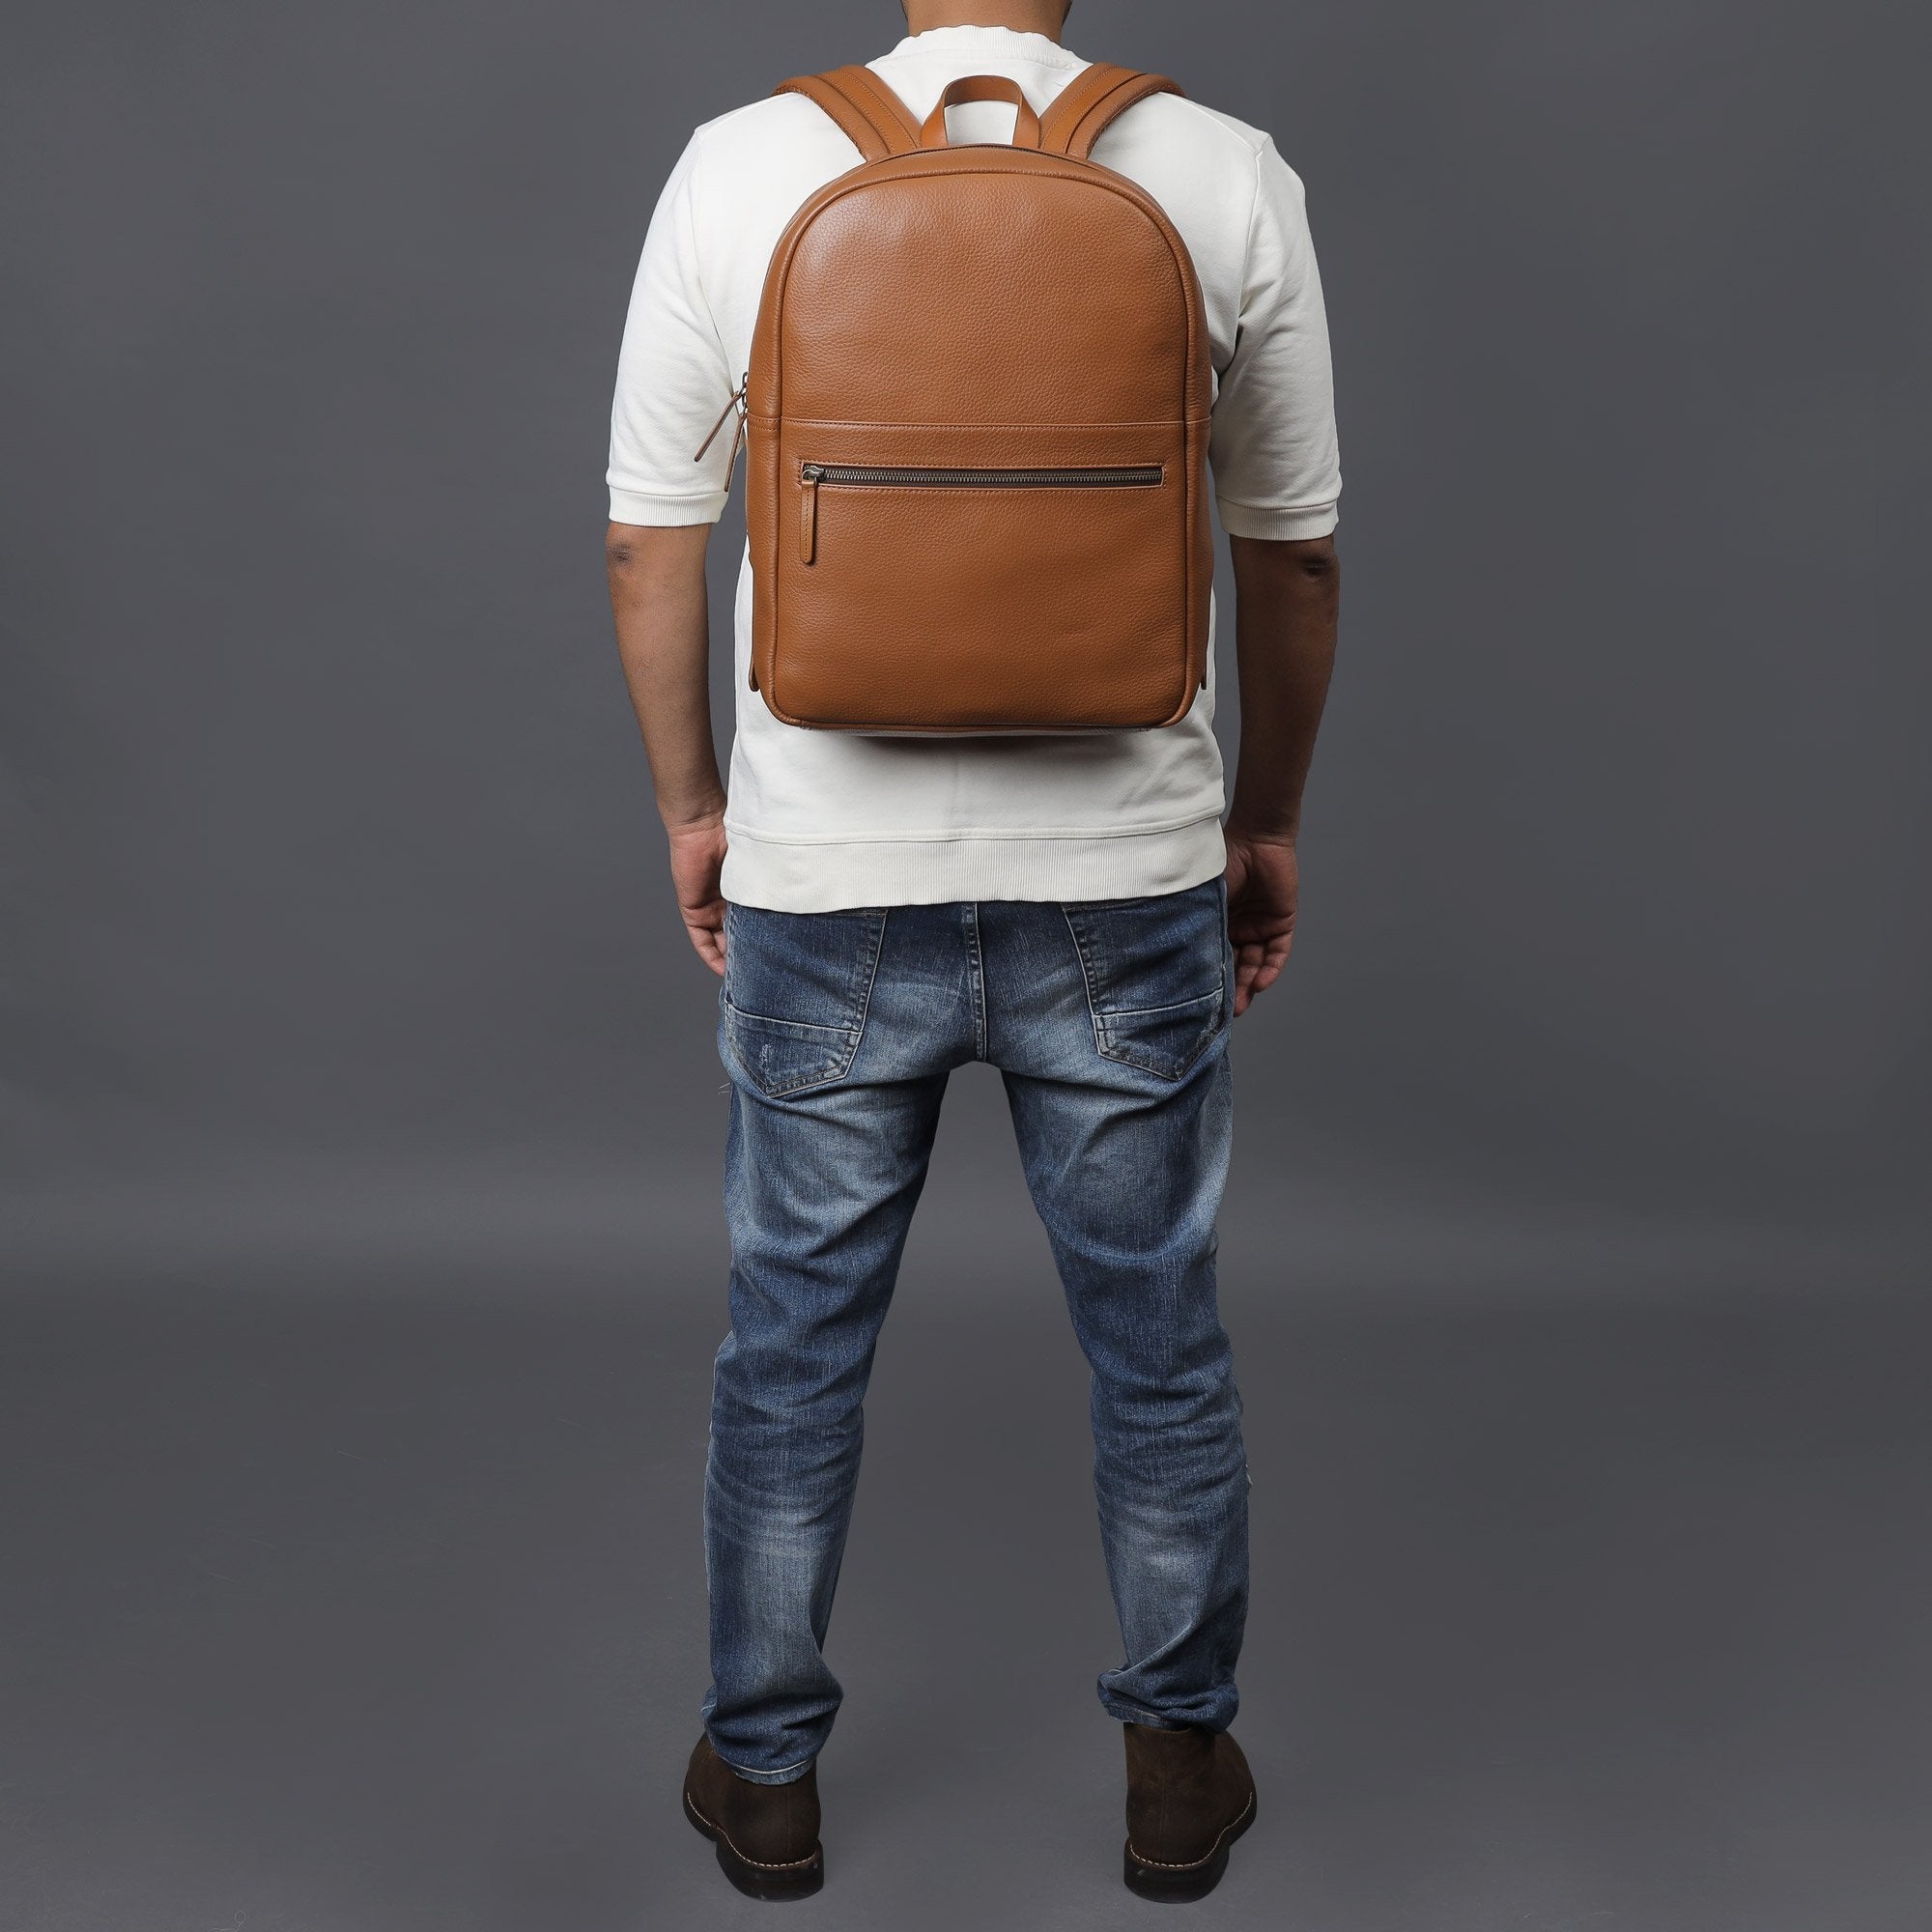 Tan Leather travel backpack